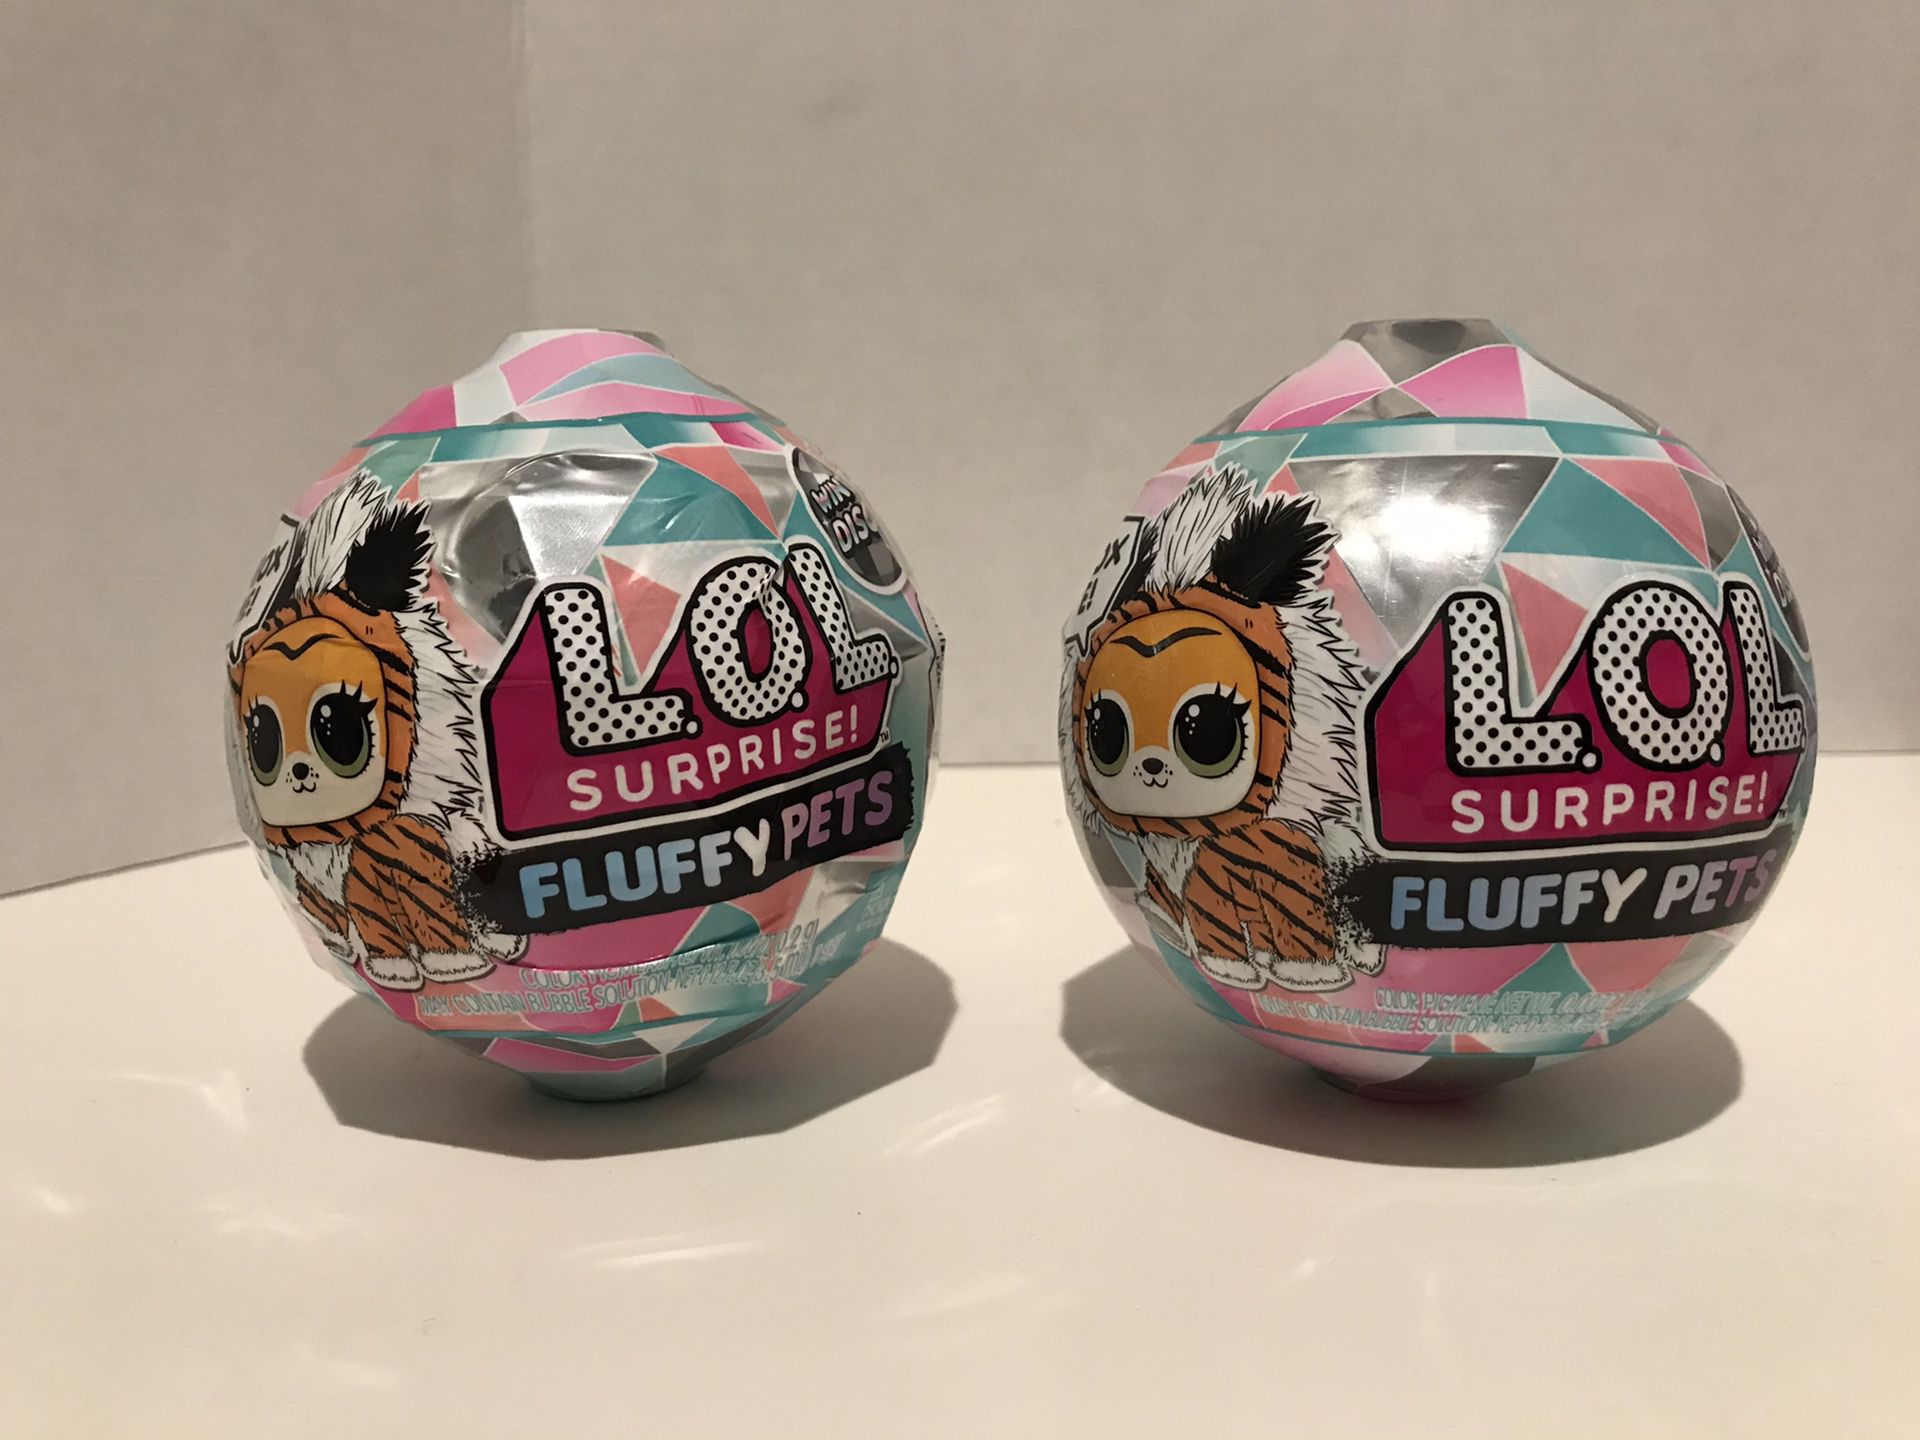 LOL Surprise! Winter Disco Series Fluffy Pets Ball (Lot of 2)